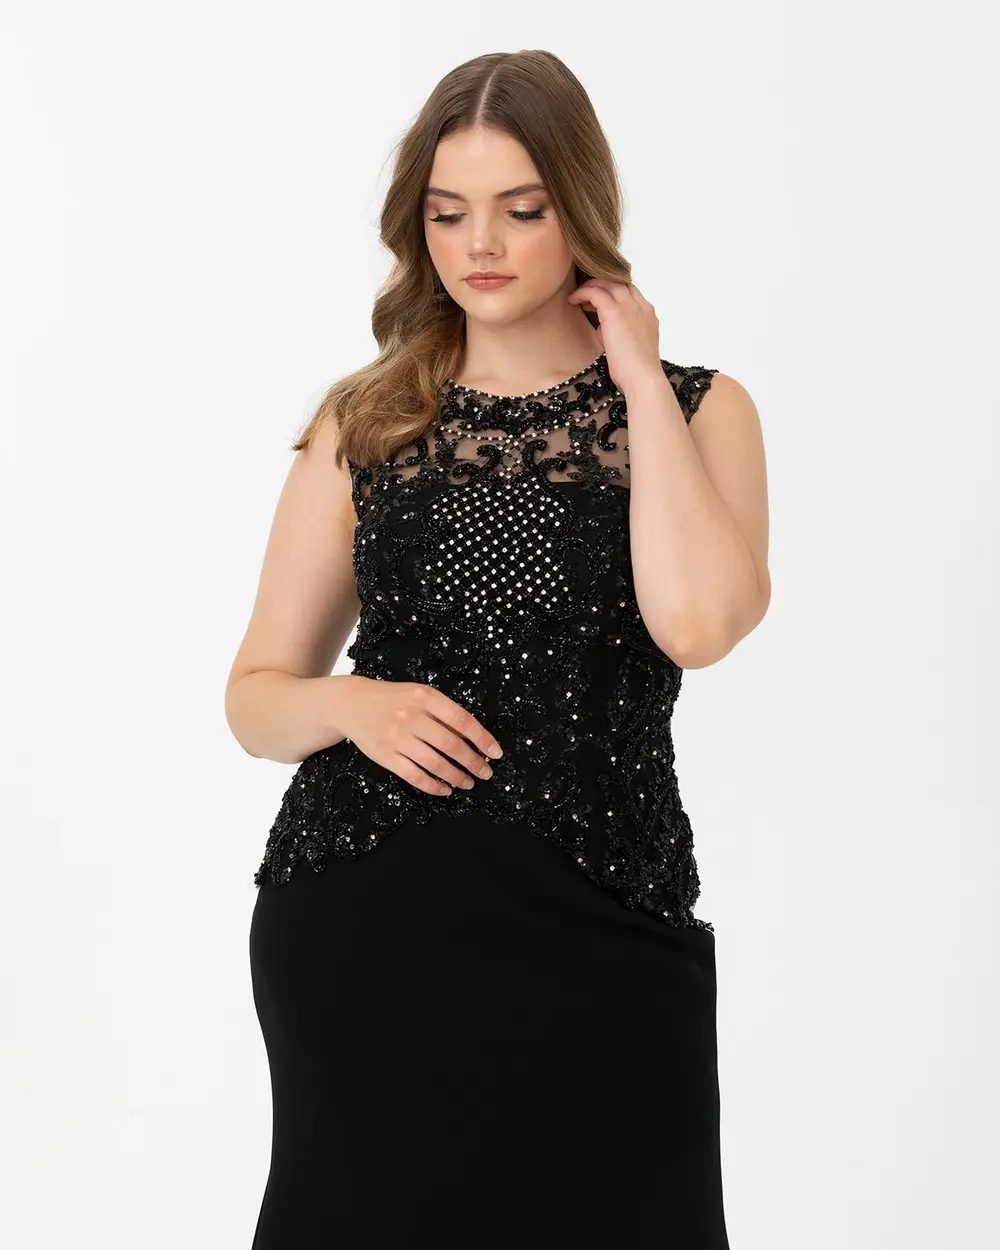 PLUS SIZE FISH FORM EMBROIDERED EVENING DRESS